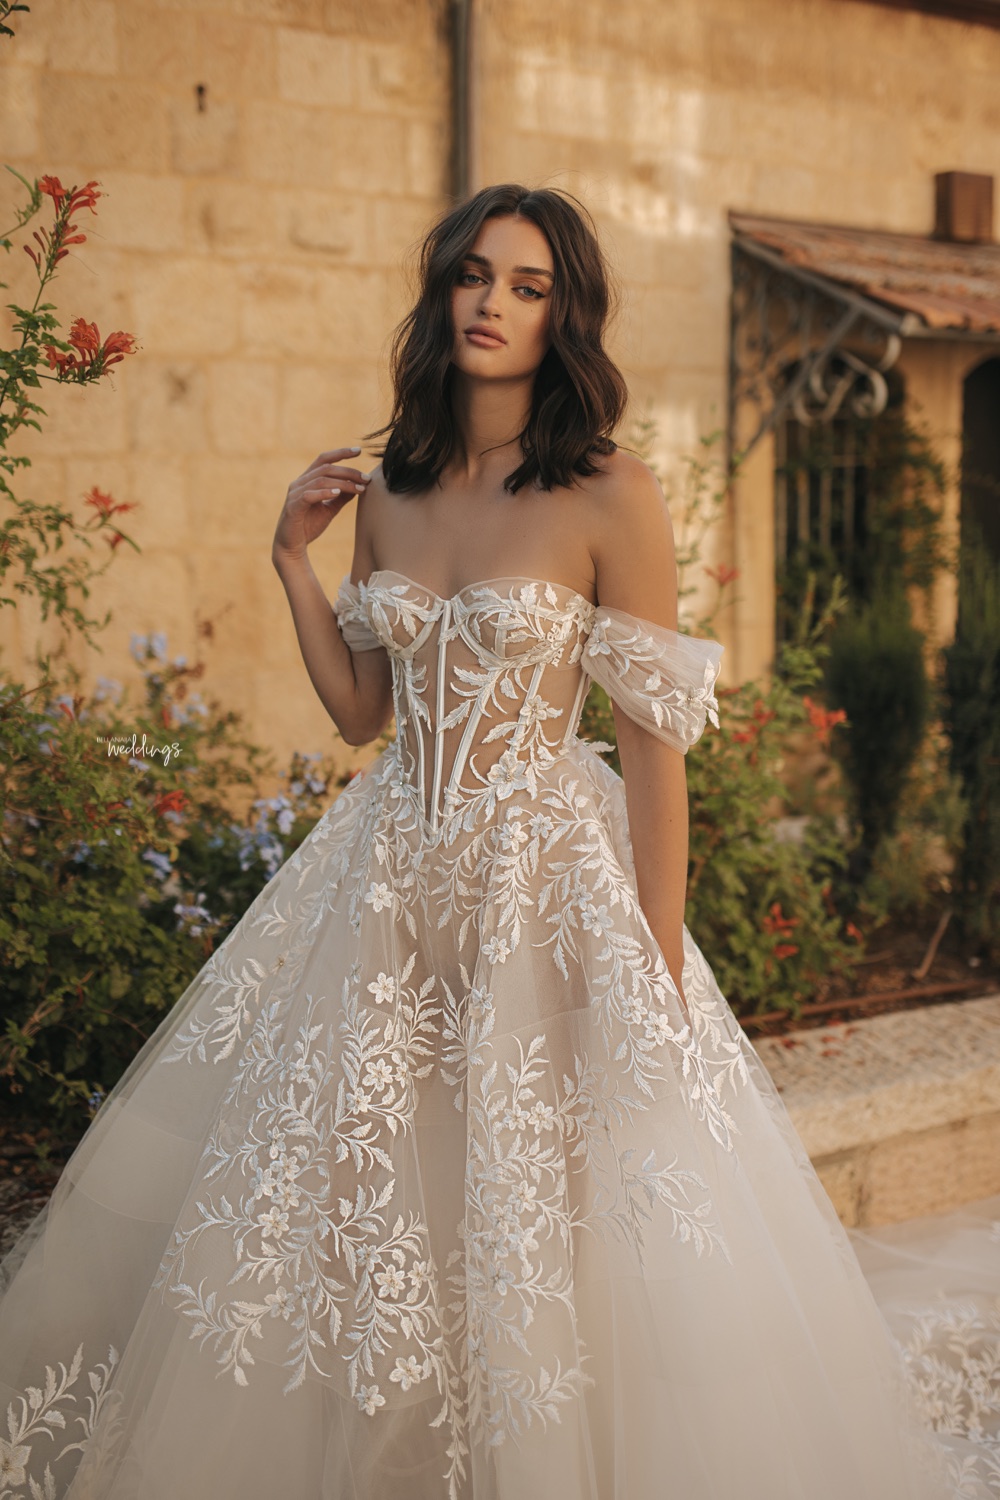 2022 Brides, We've Got Gowns That'll Make You The Talk Of The Town For Centuries 